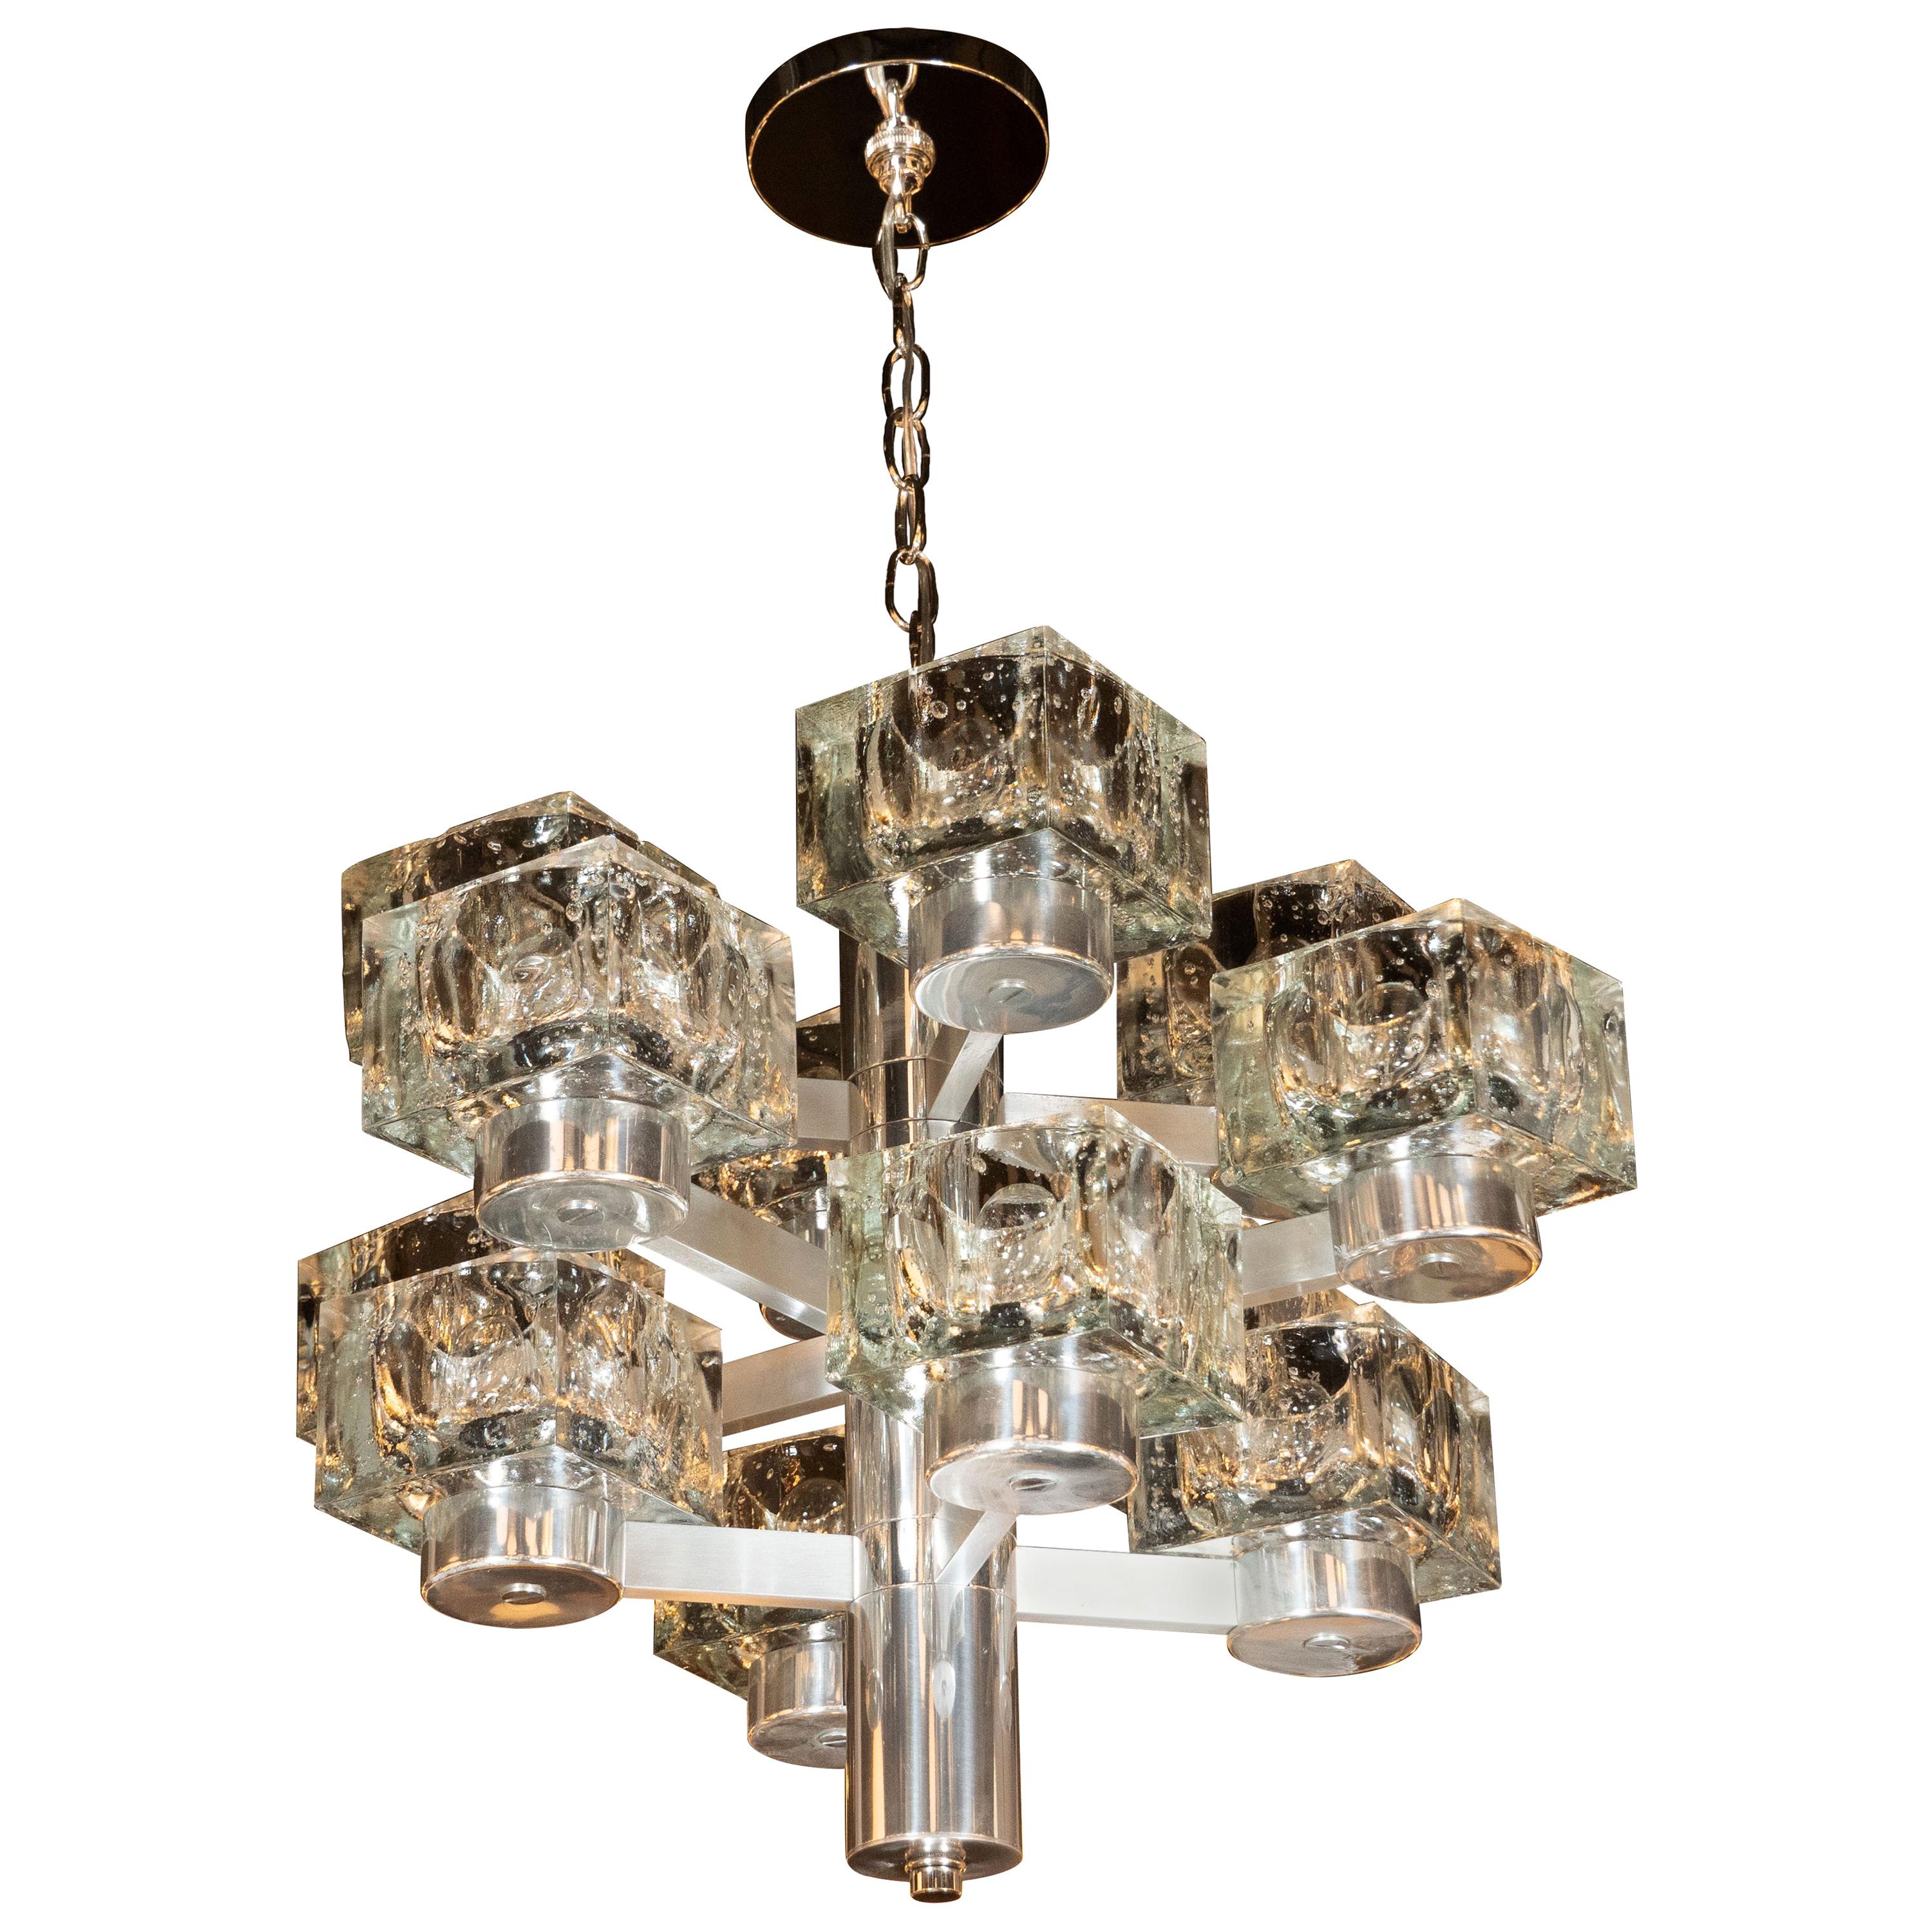 Mid-Century Modern Twelve Cube Glass Chandelier with Chrome Fittings by Sciolari